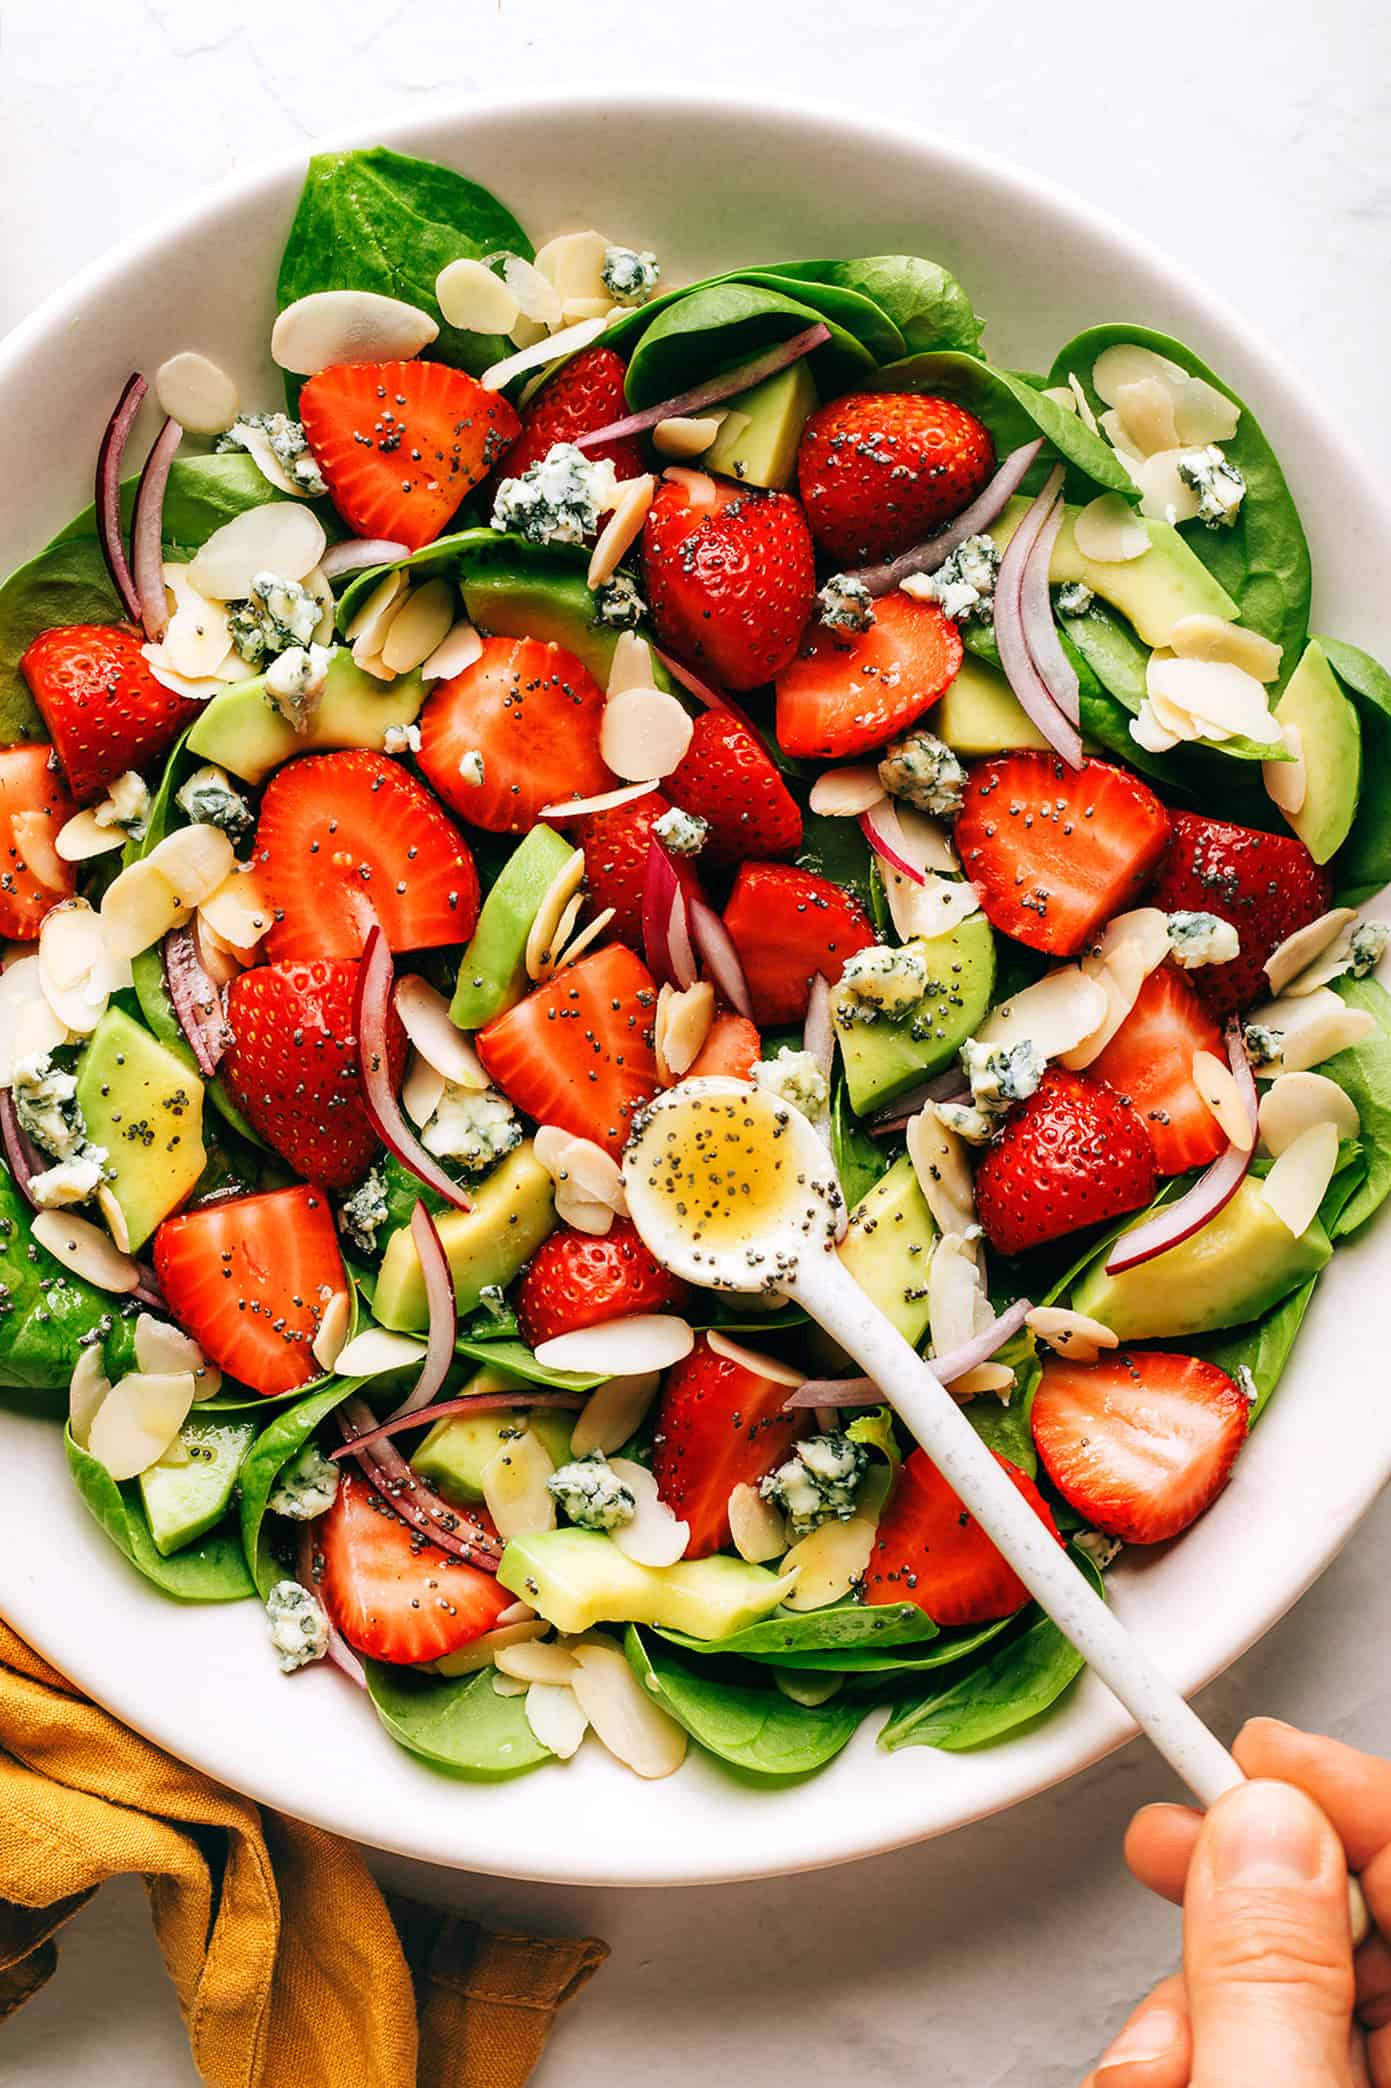 Strawberry and spinach salad with poppy seed dressing